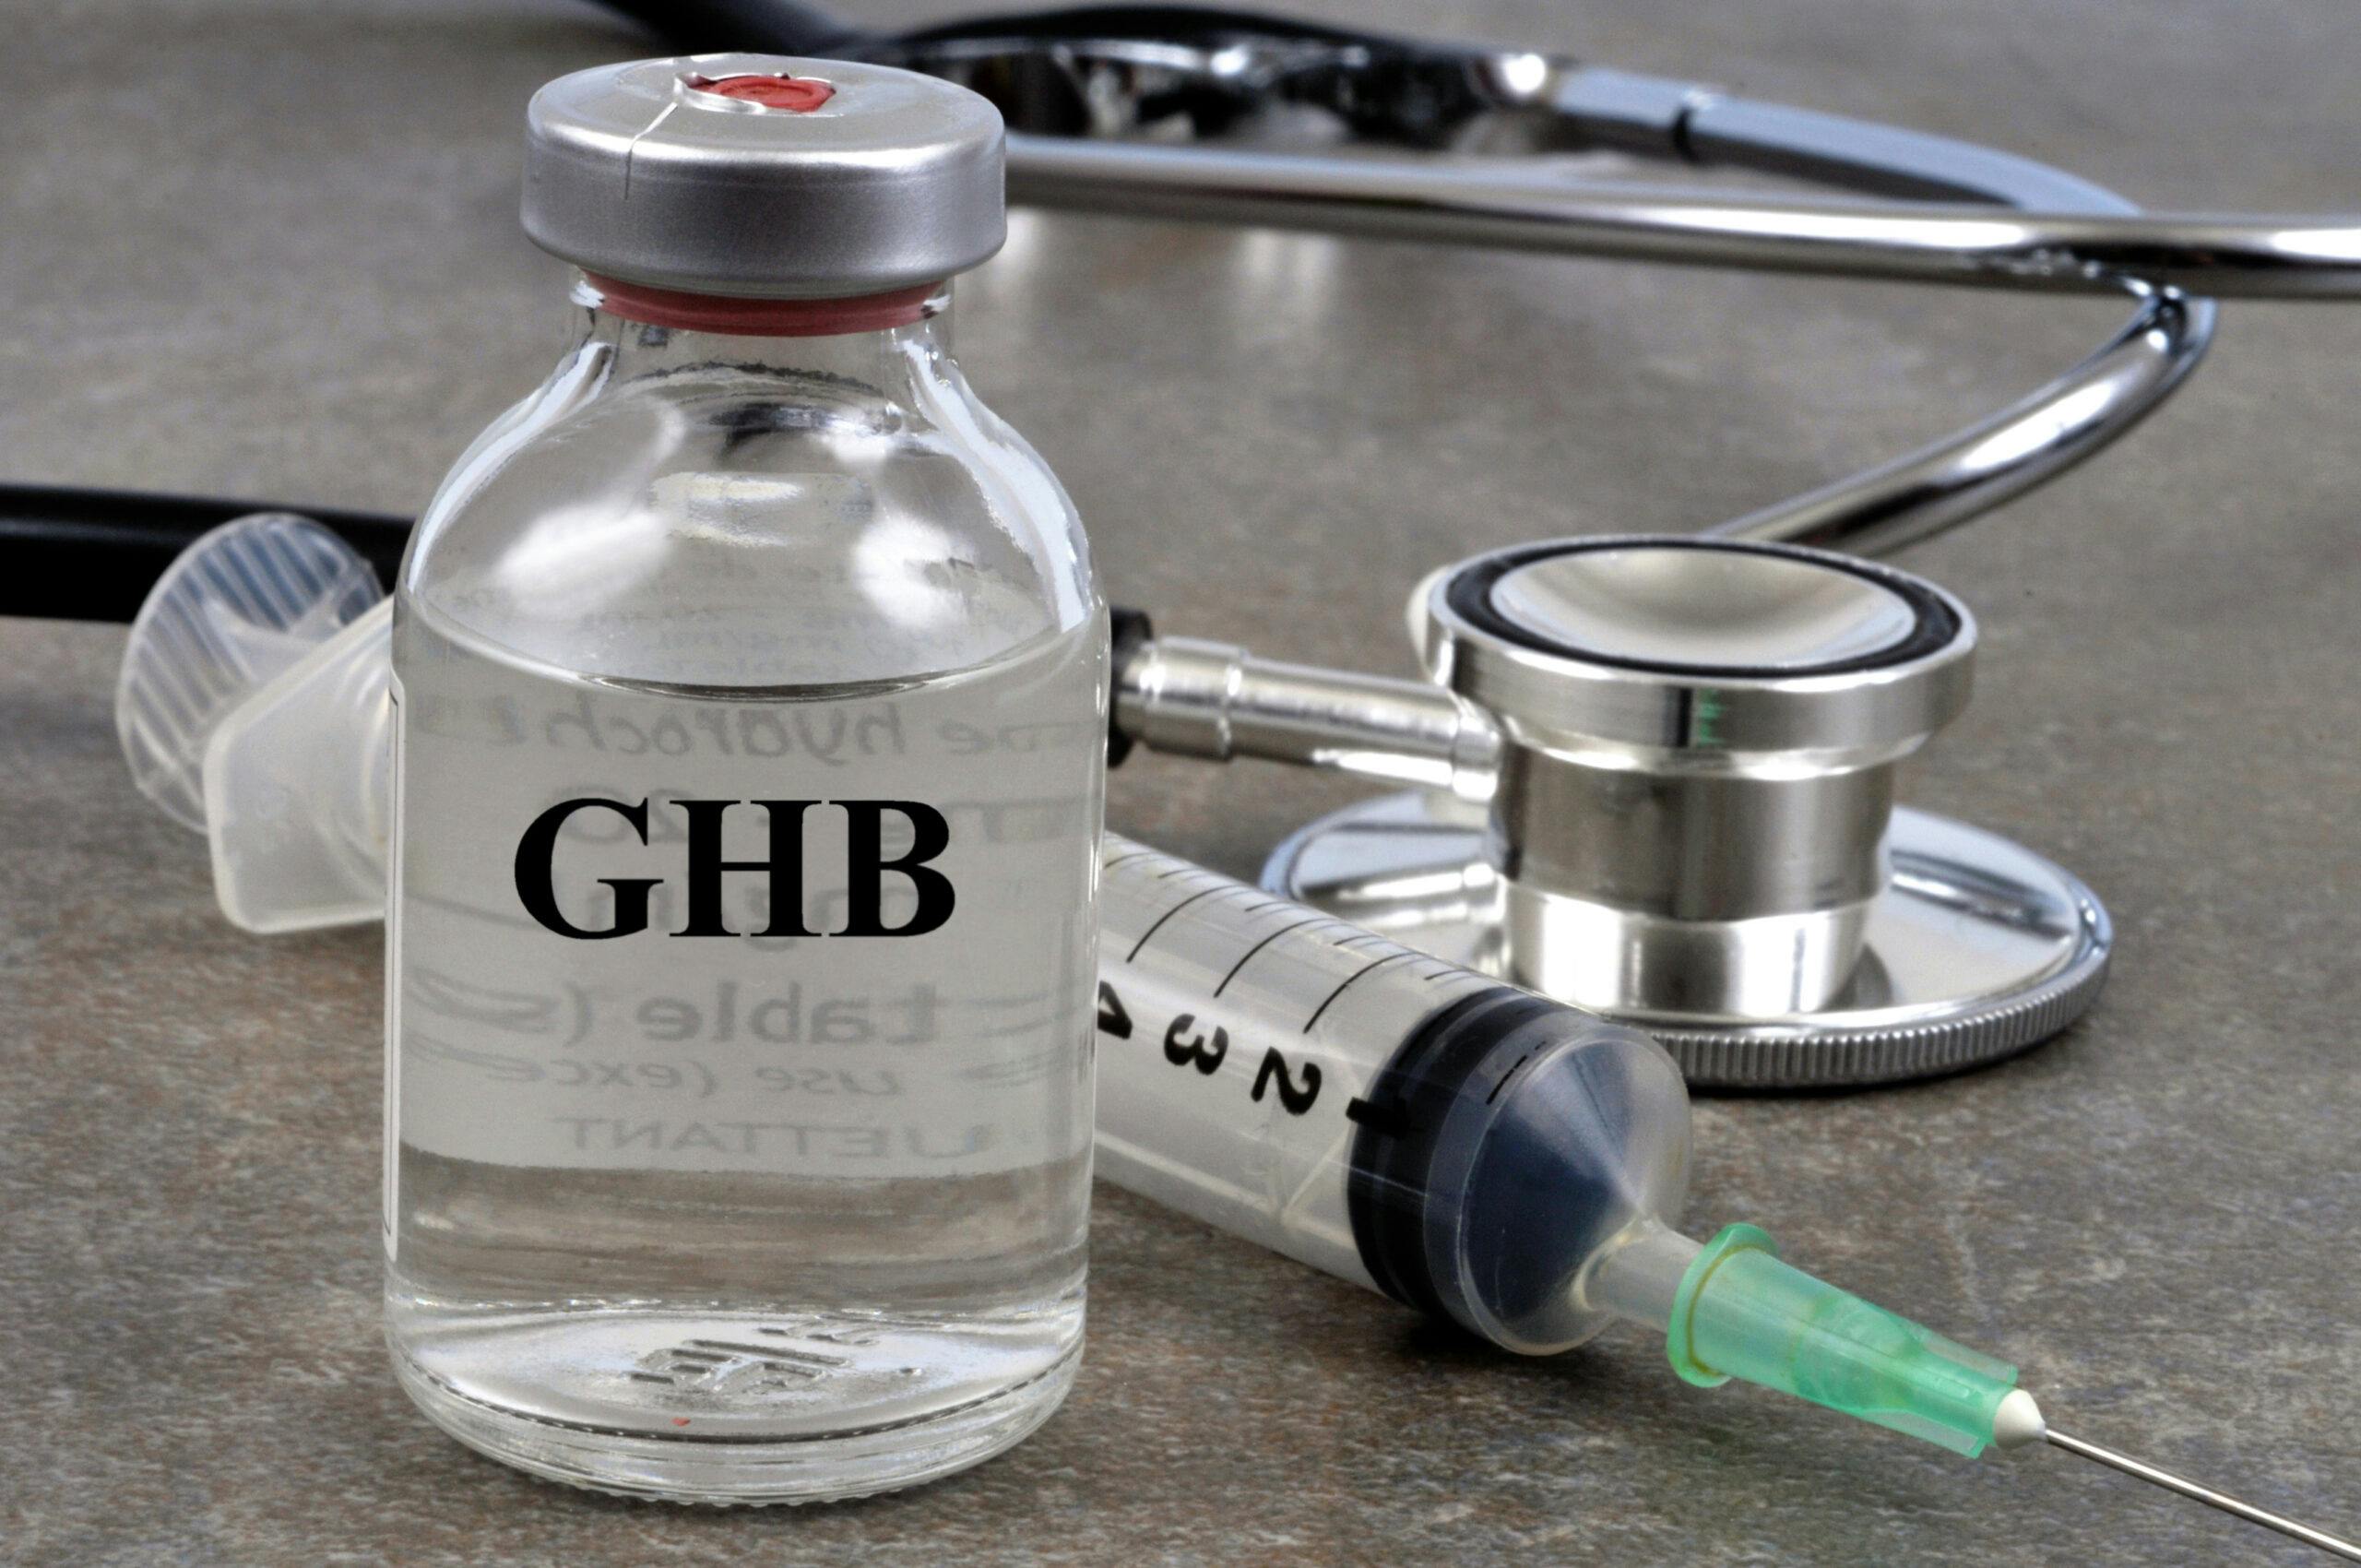 ghb vial with hypodermic needle and stethoscope